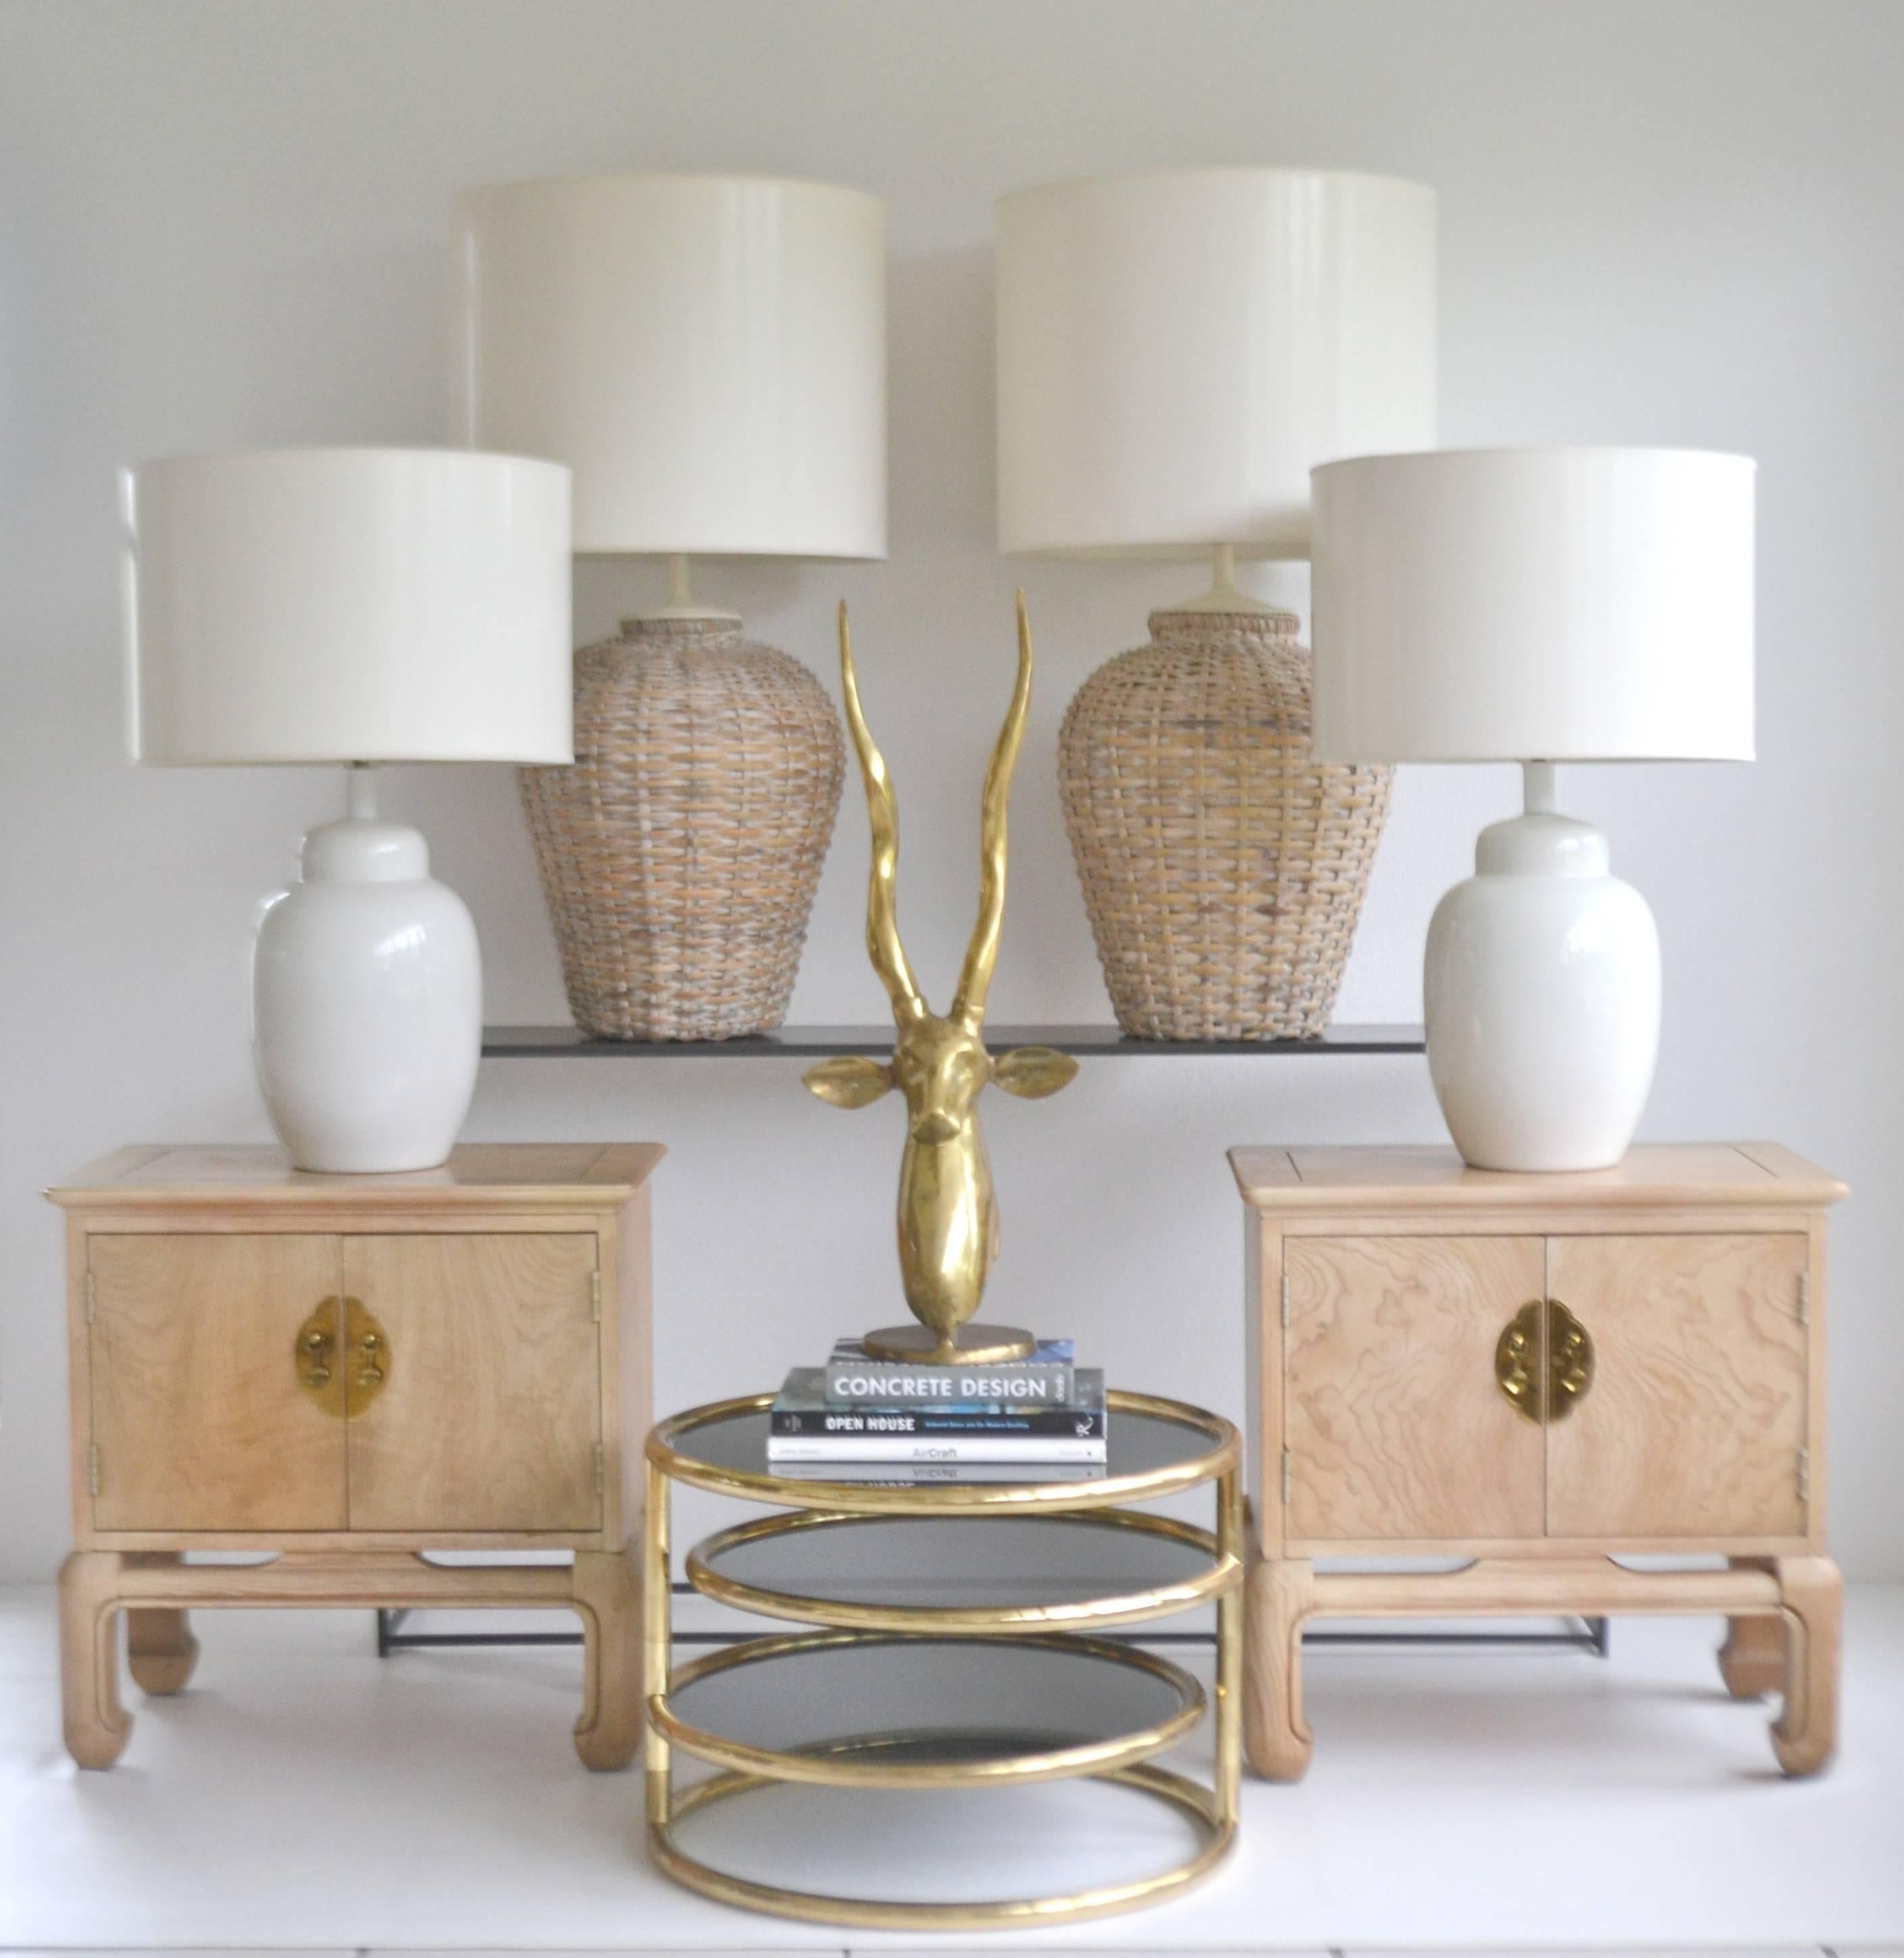 Striking pair of midcentury Blanc de Chine ginger jar form table lamps, circa 1960s-1970s. These artisan thrown white glazed lamps are wired with brass fittings. Shades not included.
Measurements: Overall: 28